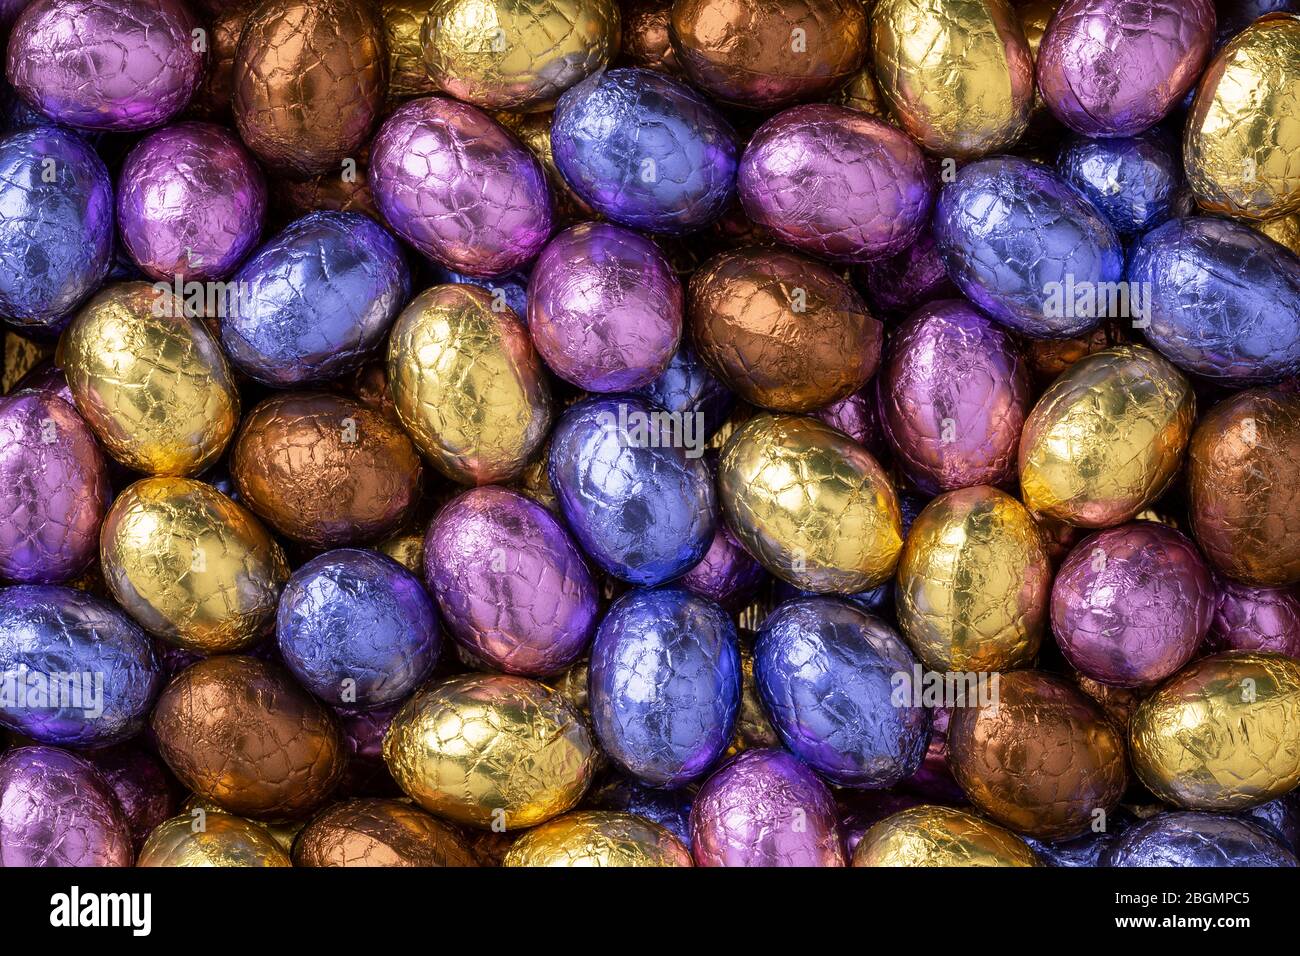 Chocolate easter eggs in colorful tinfoil close up full frame Stock Photo